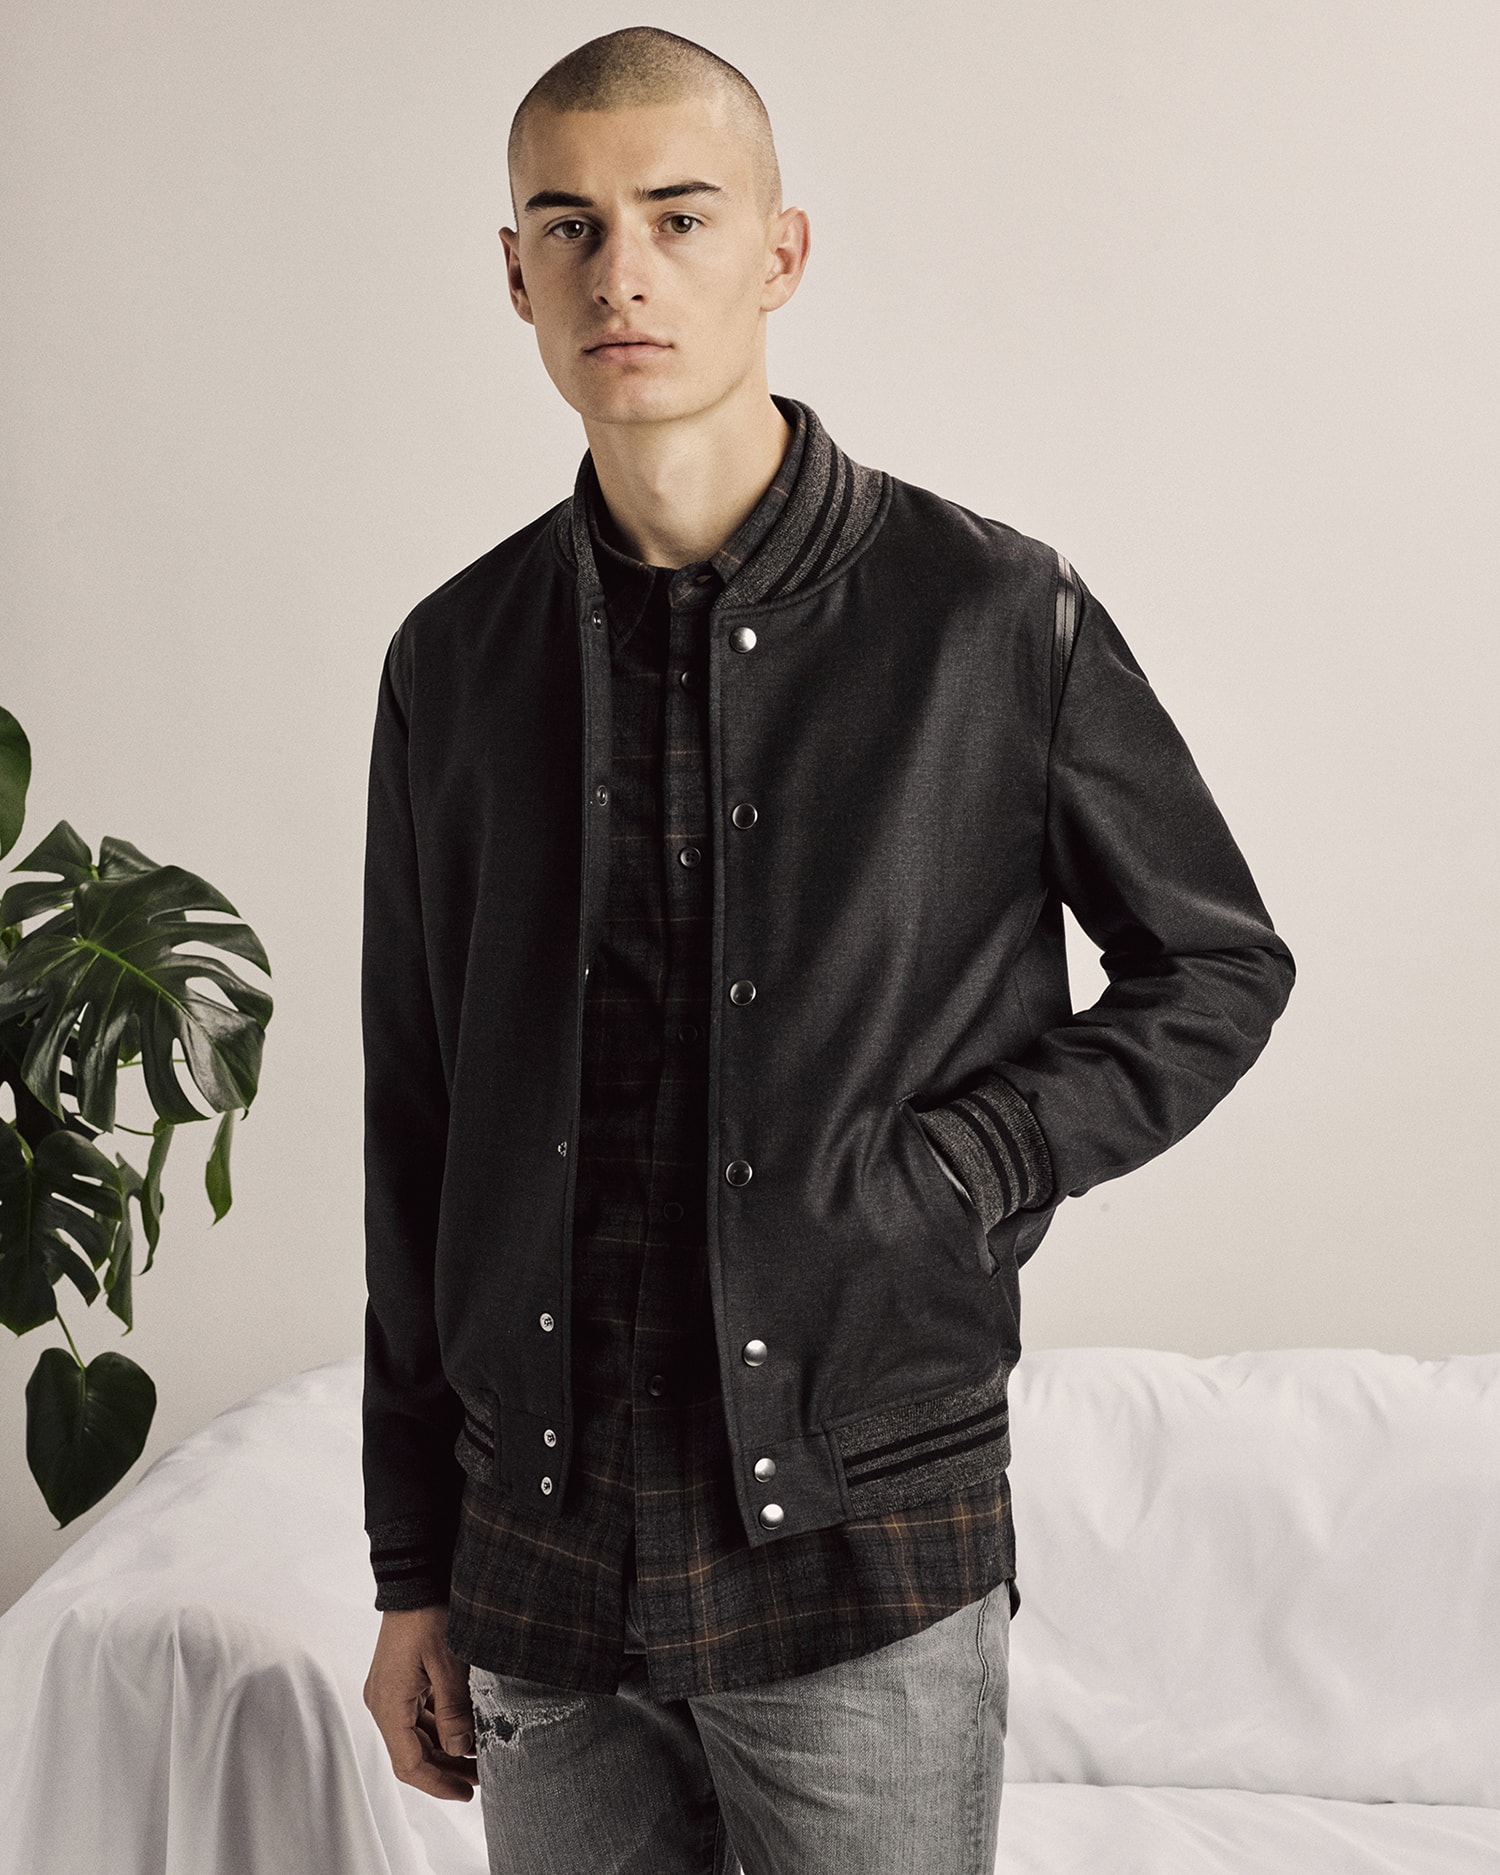 John Elliott Launches Black Friday Collection Thanksgiving Capsule Collection varsity jacket stadium plaid flannels cashmere beanie cold weather promotion menswear